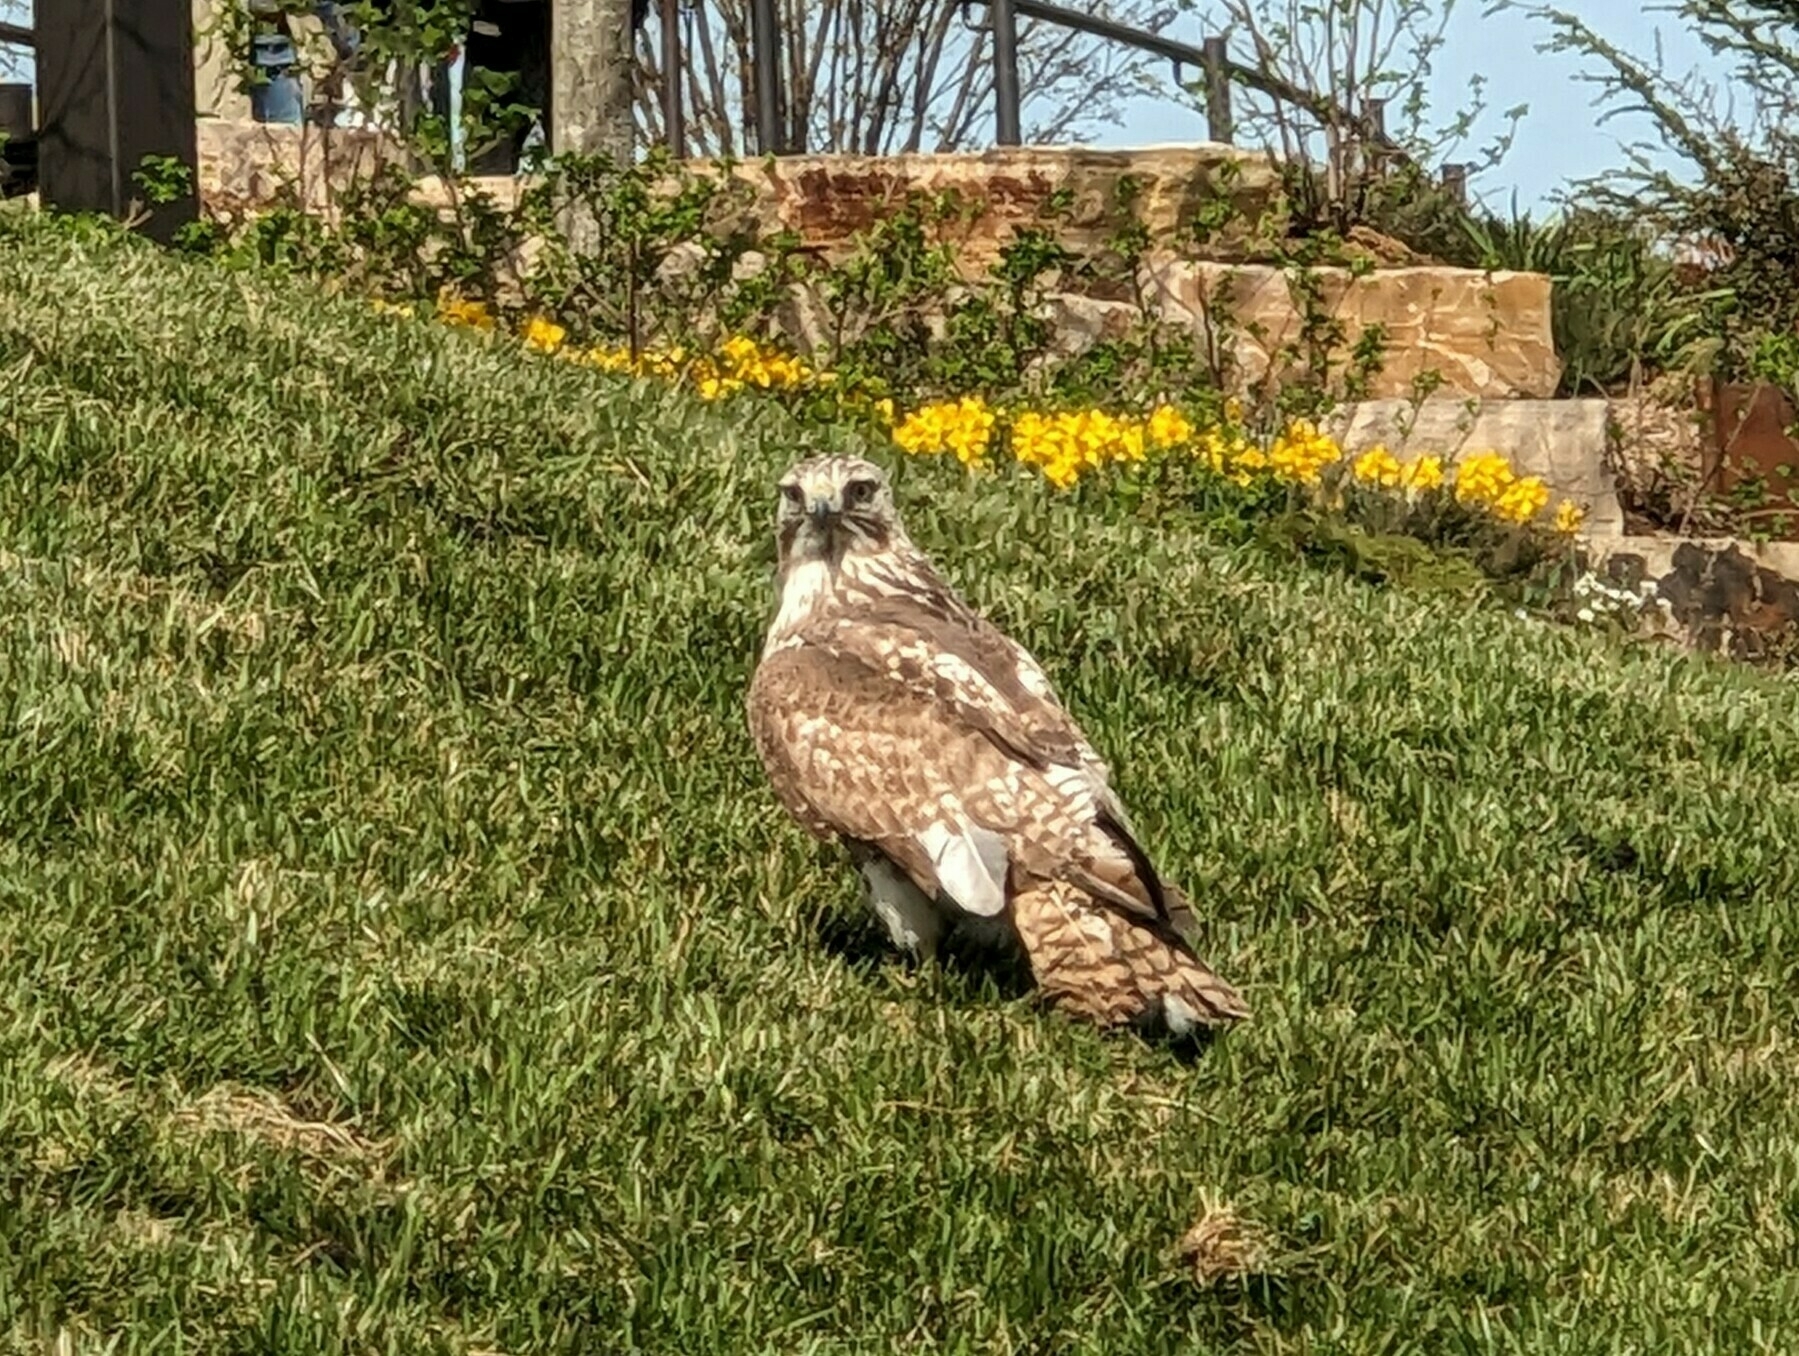 hawk on a manicured park lawn next to some daffodils